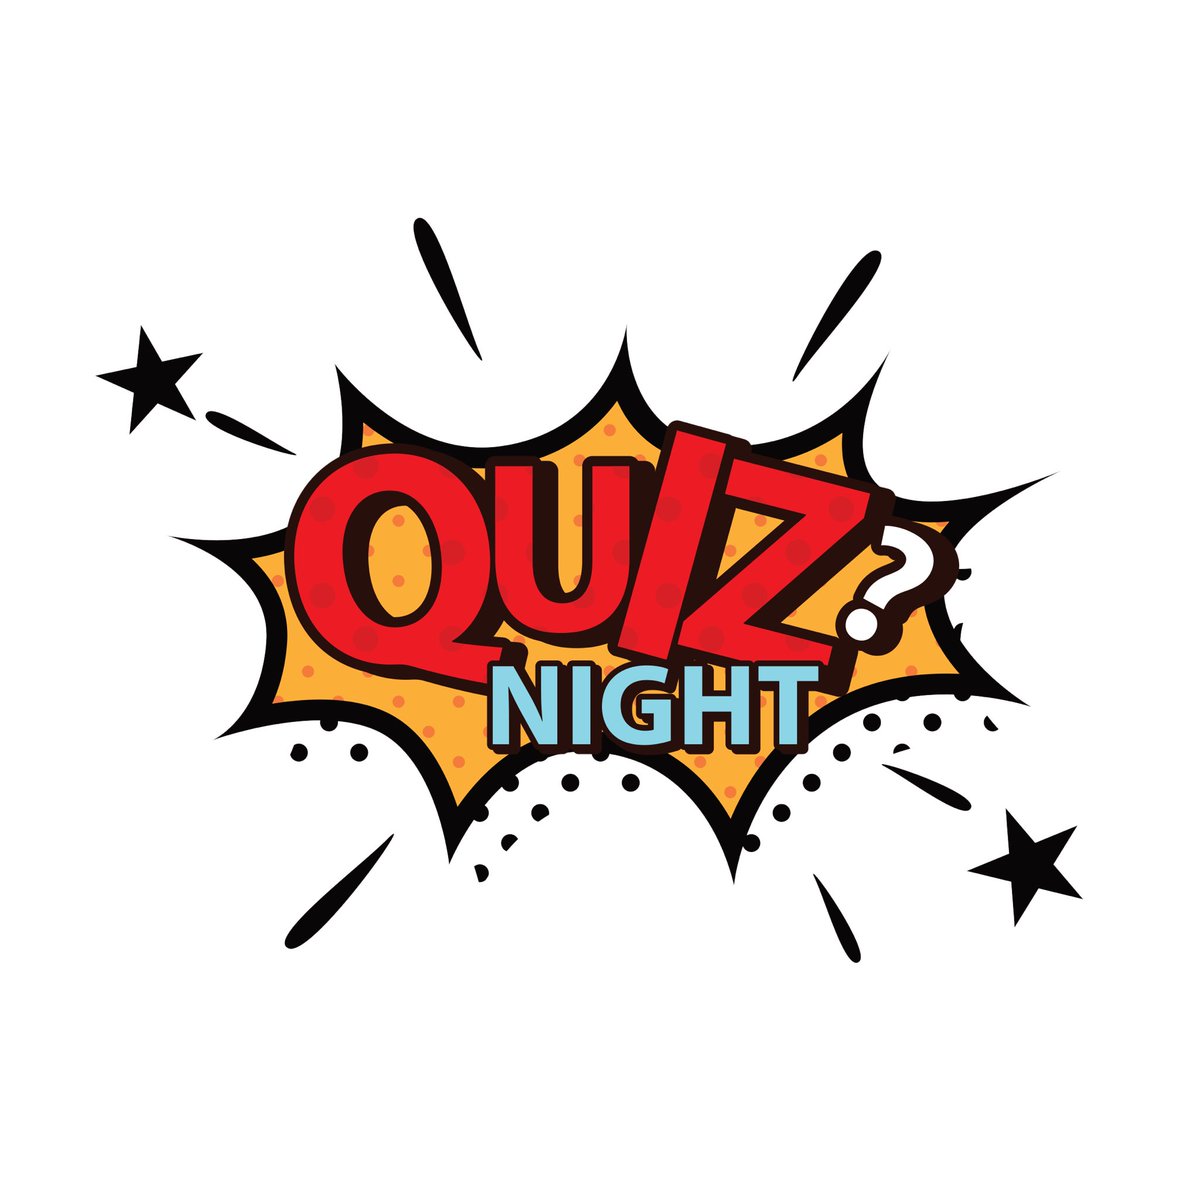 ATTENTION HESWALL. It’s quiz night. All for charity . No need to book. Winners choose the charity and plenty of beer to be won too. See you for 7.30 tonight Wednesday. Thanks.